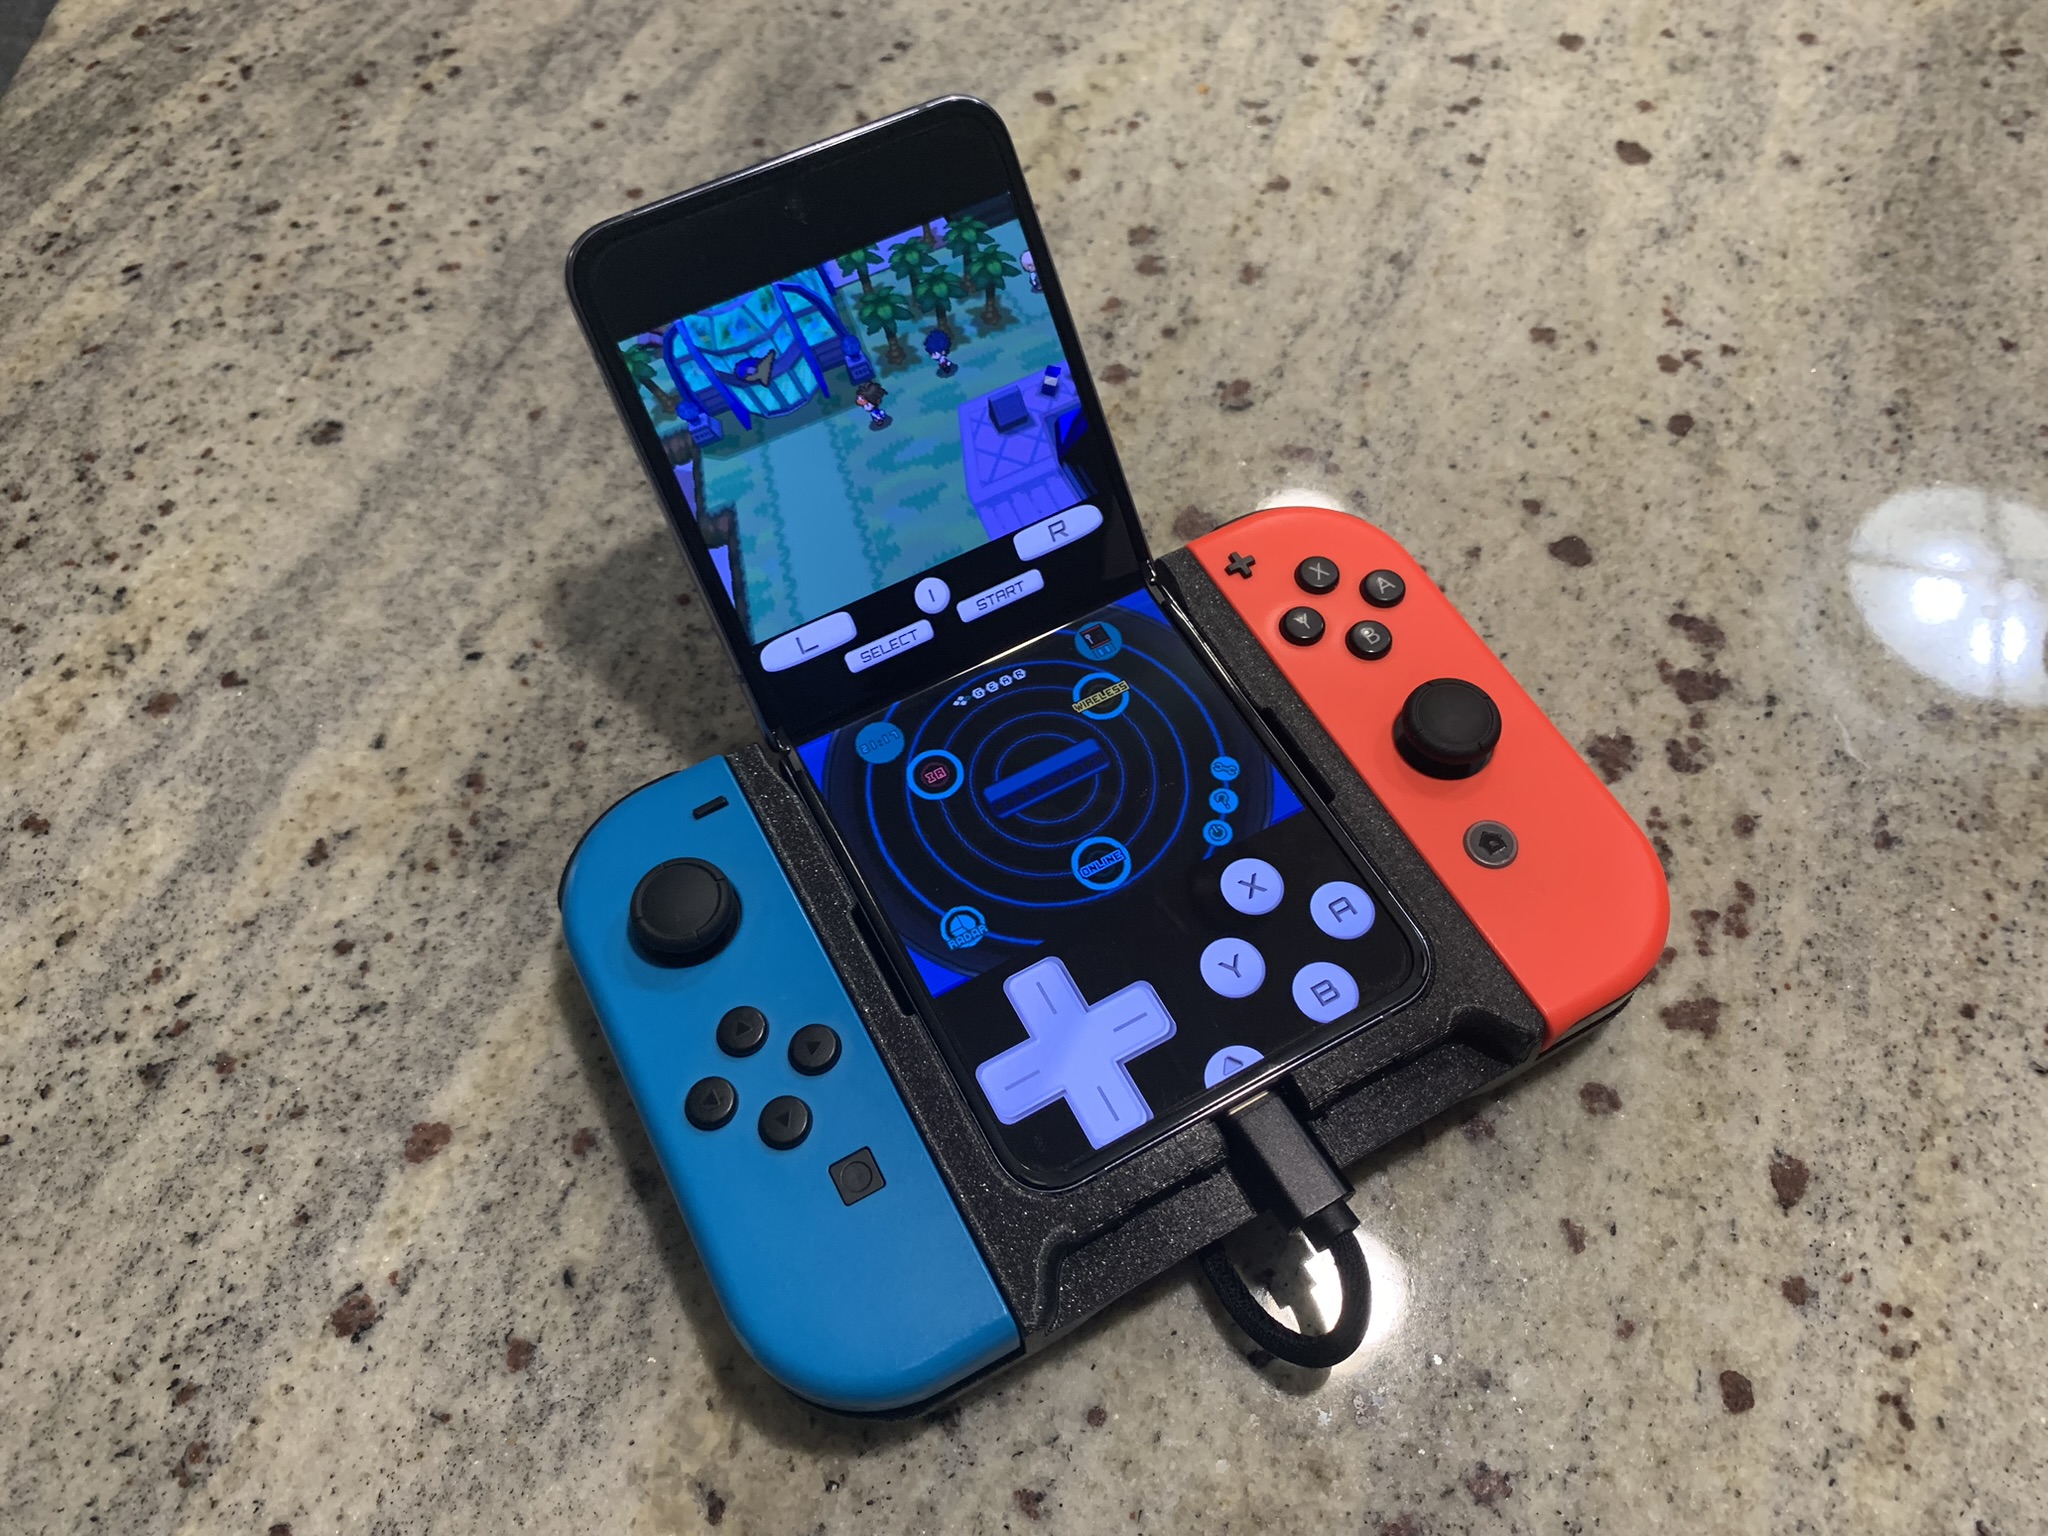 Samsung Galaxy Z Flip with Nintendo Switch Joy-Cons is the crossover we  didn't know we needed - Yanko Design